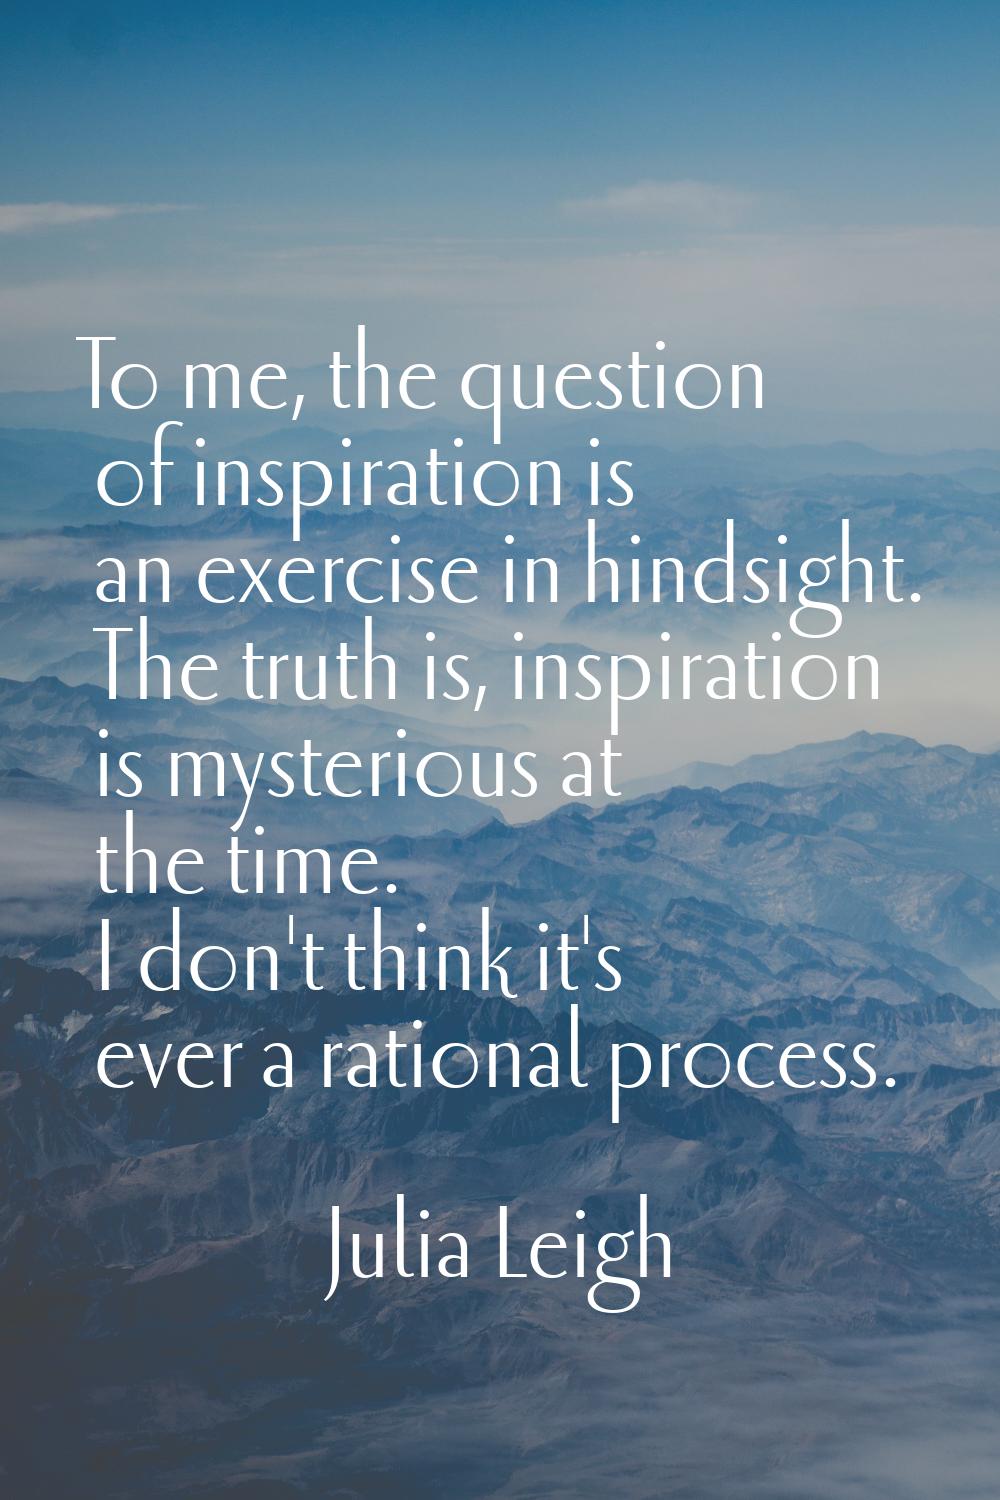 To me, the question of inspiration is an exercise in hindsight. The truth is, inspiration is myster